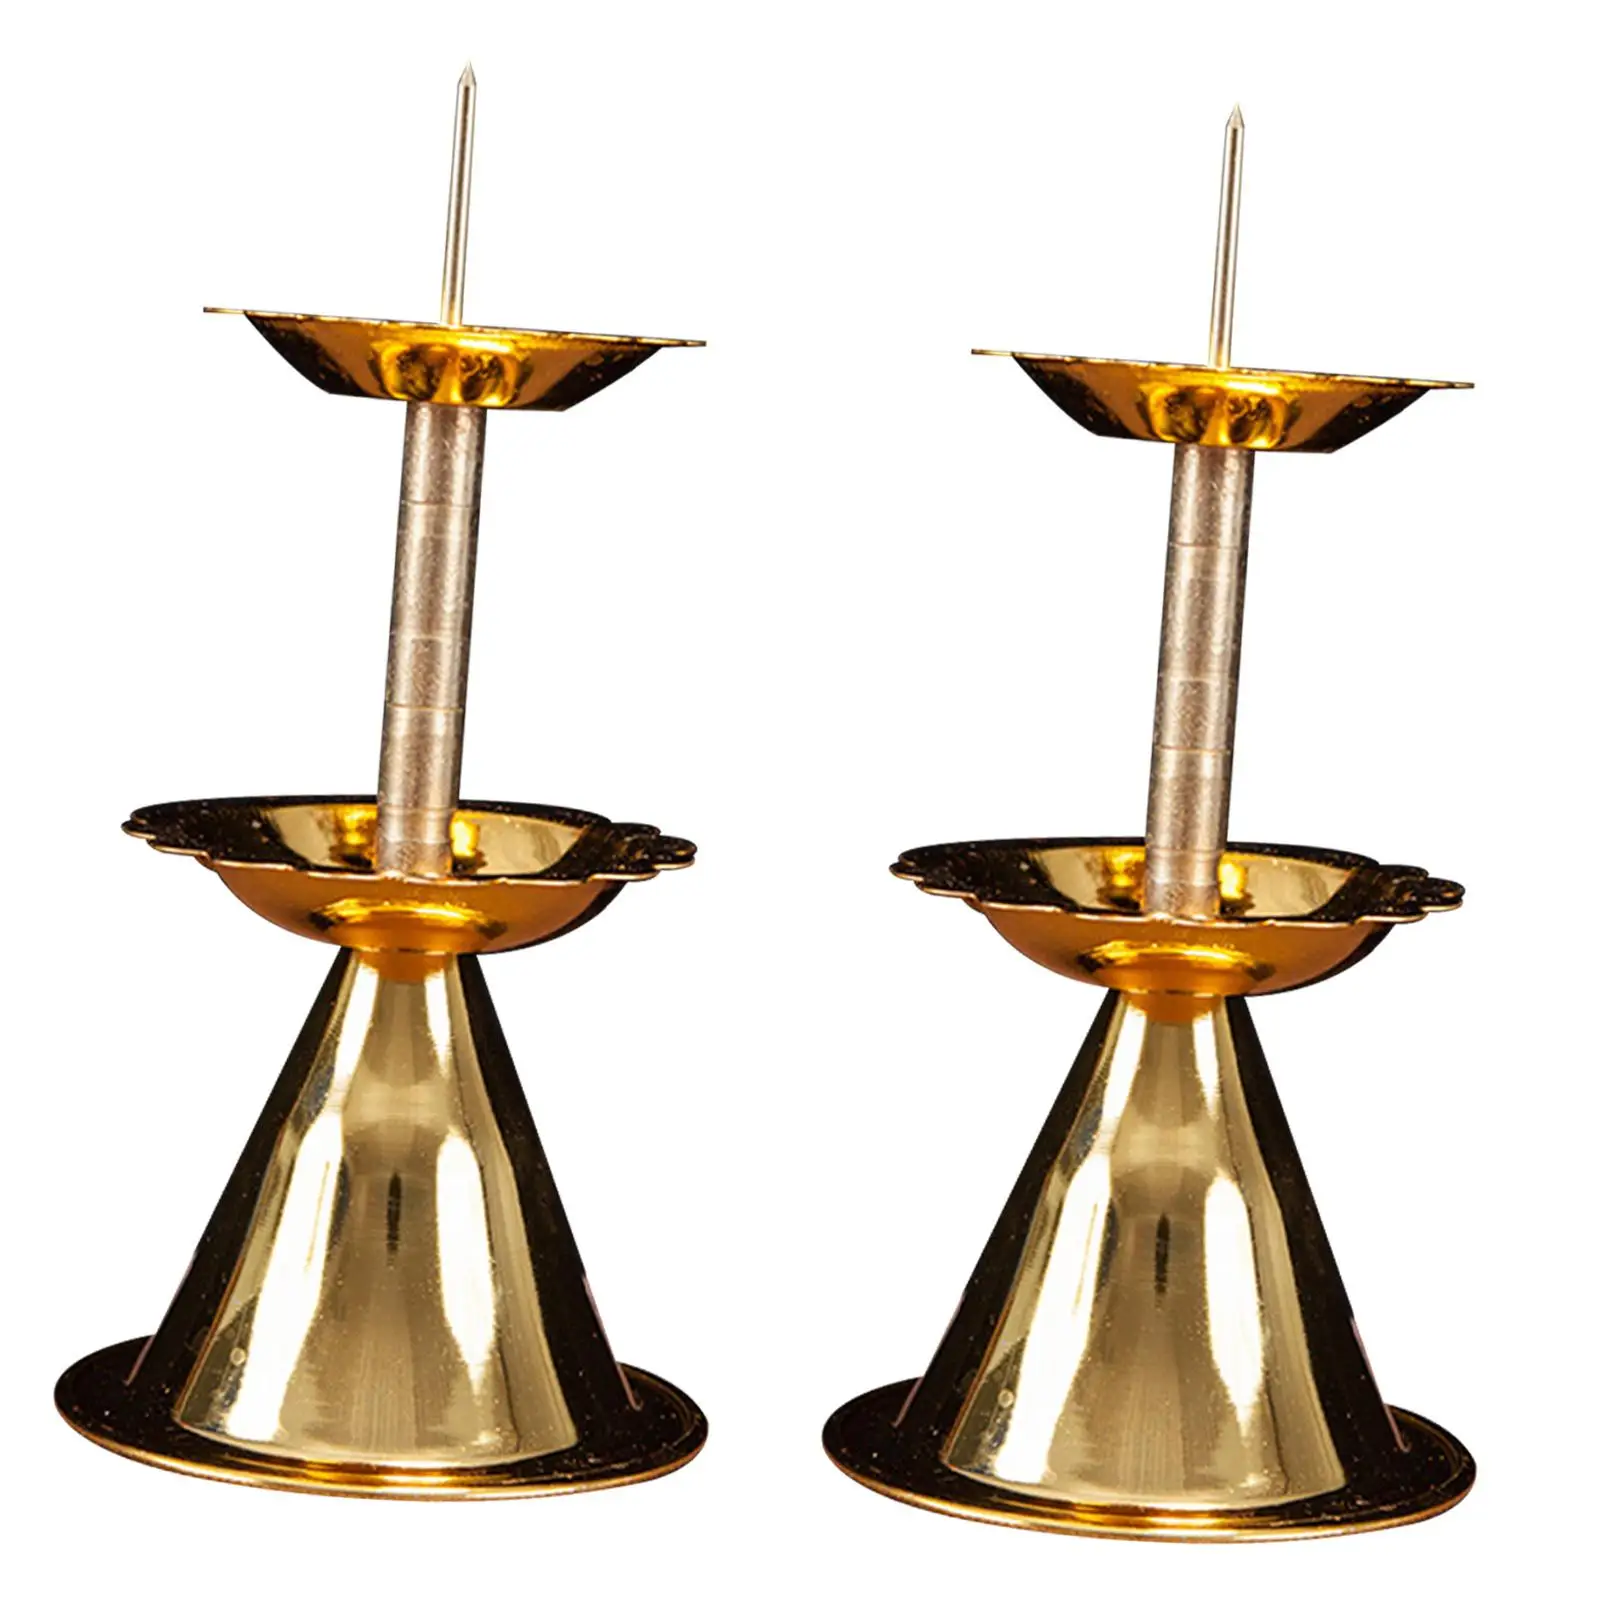 2Pcs Buddhist Tealight Candle Holders Party Candelabra Metal Candlestick for Housewarming Mantel Dining Room Hotel Farmhouse